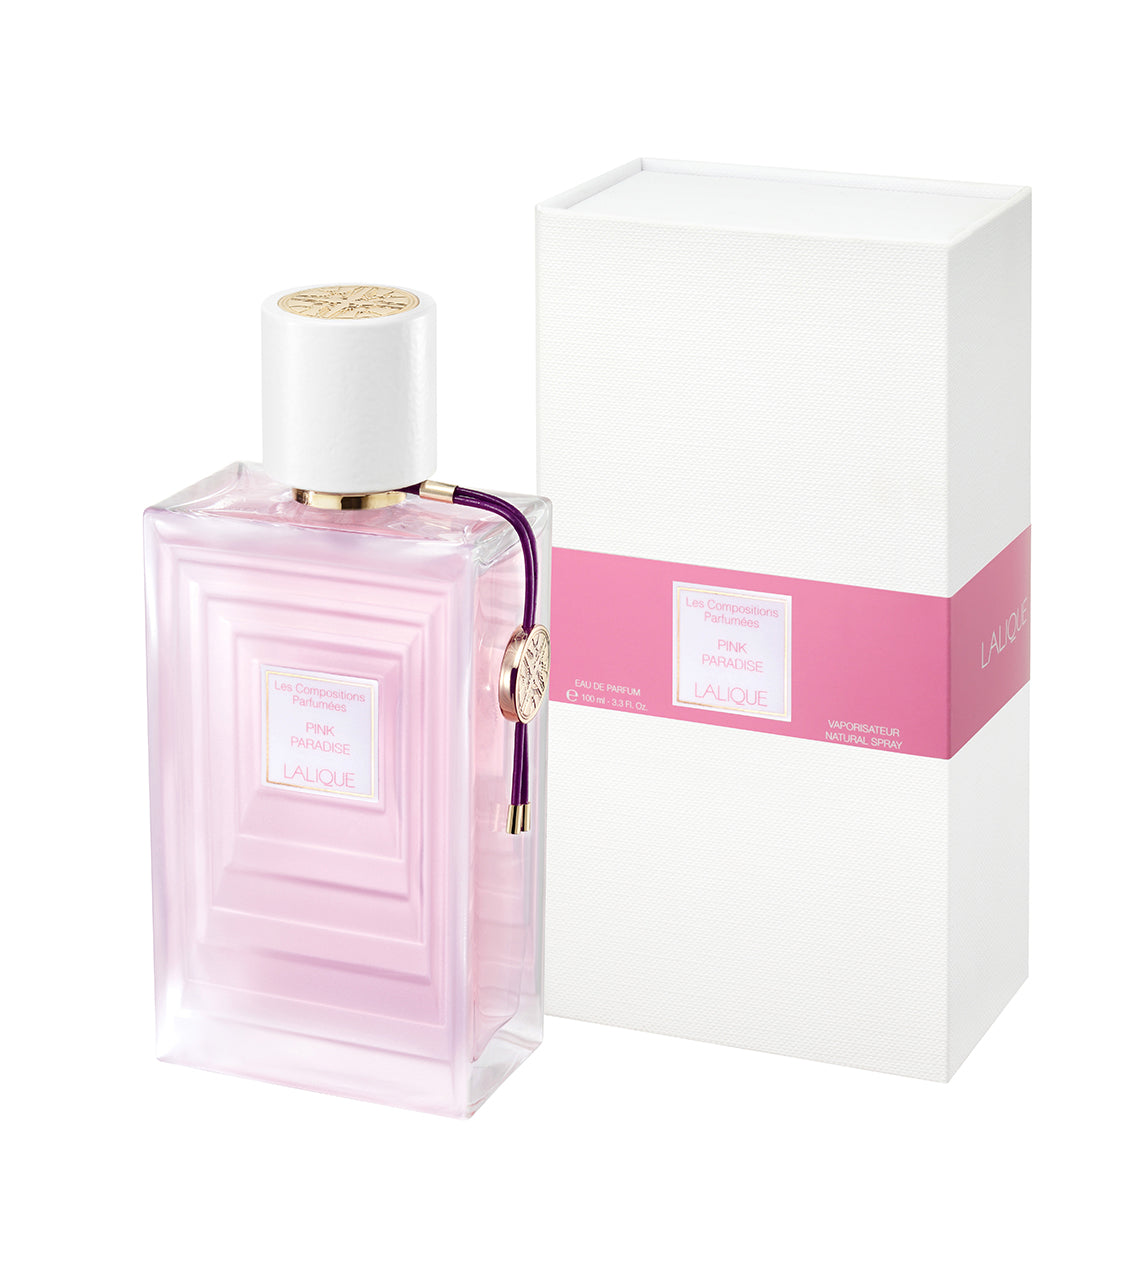 "PINK PARADISE" EDP 100ML LE COMPOSITIONS COLLECTION - EXCLUSIVE - EASTERN SCENT